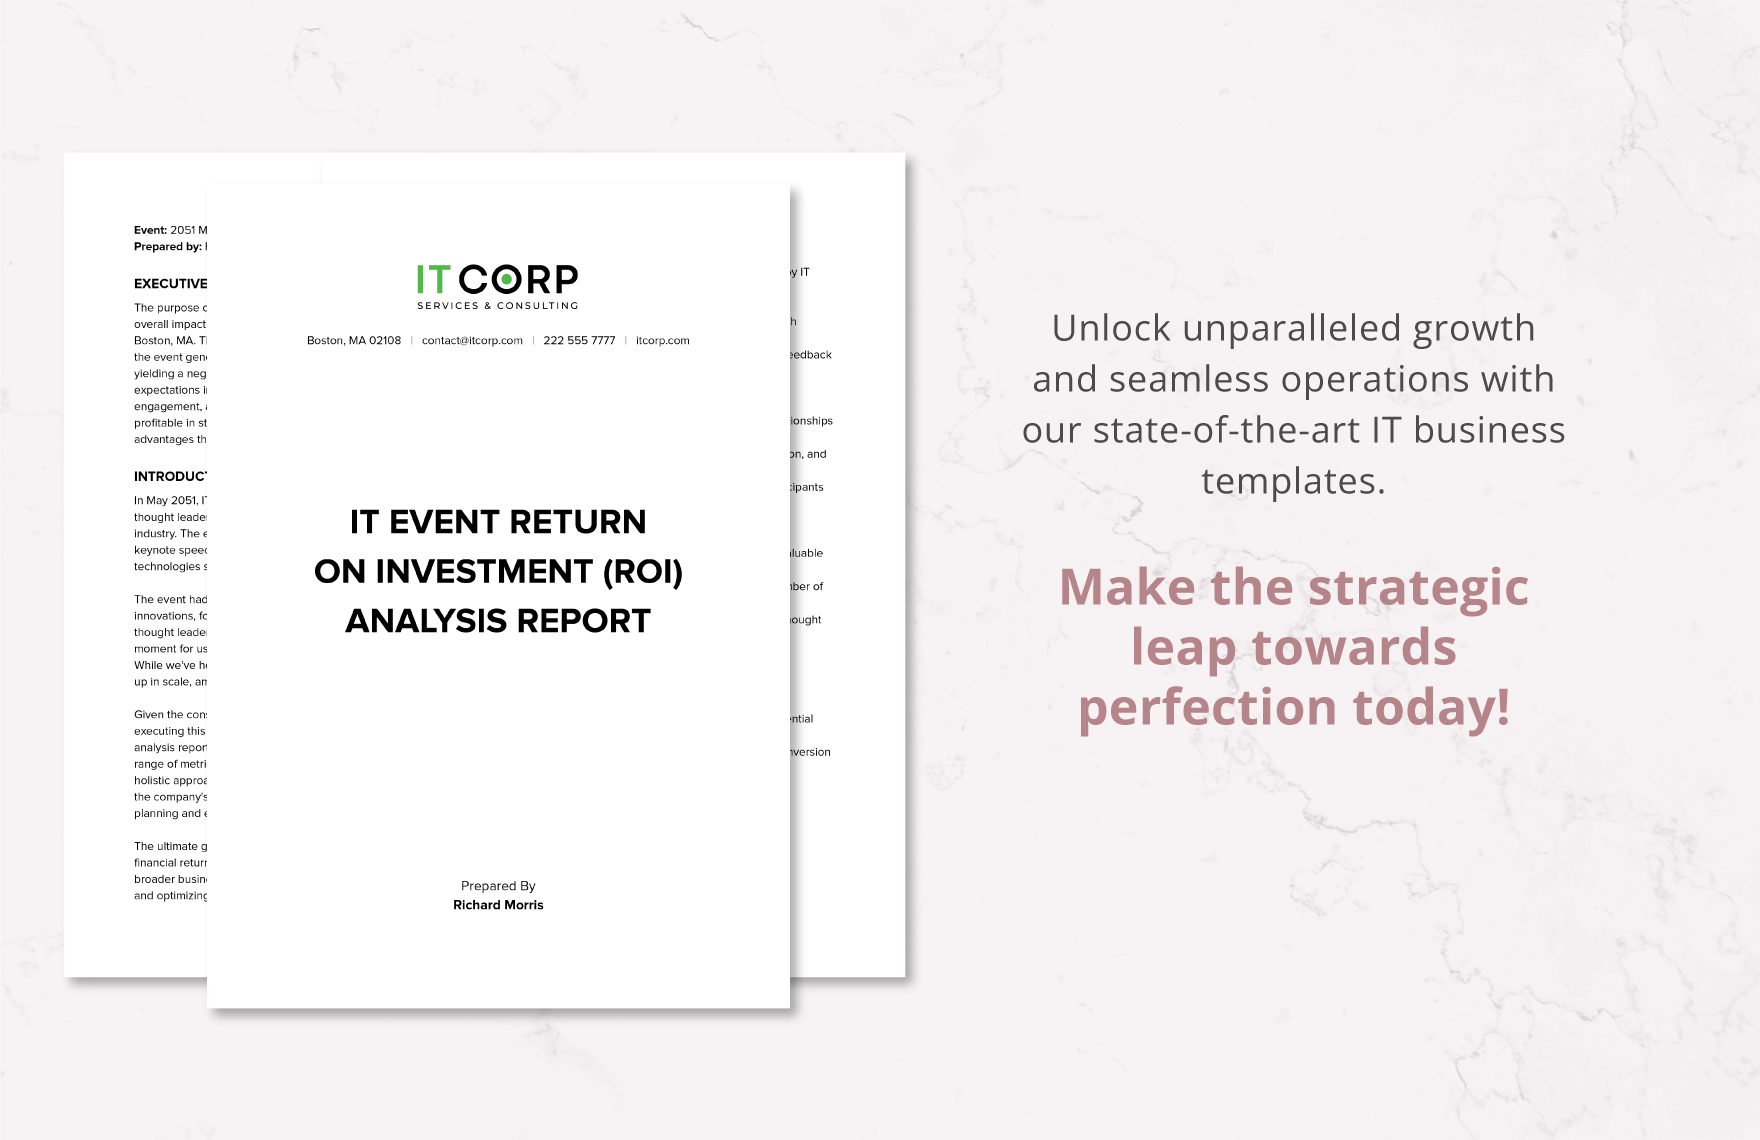 IT Event Return on Investment (ROI) Analysis Report Template